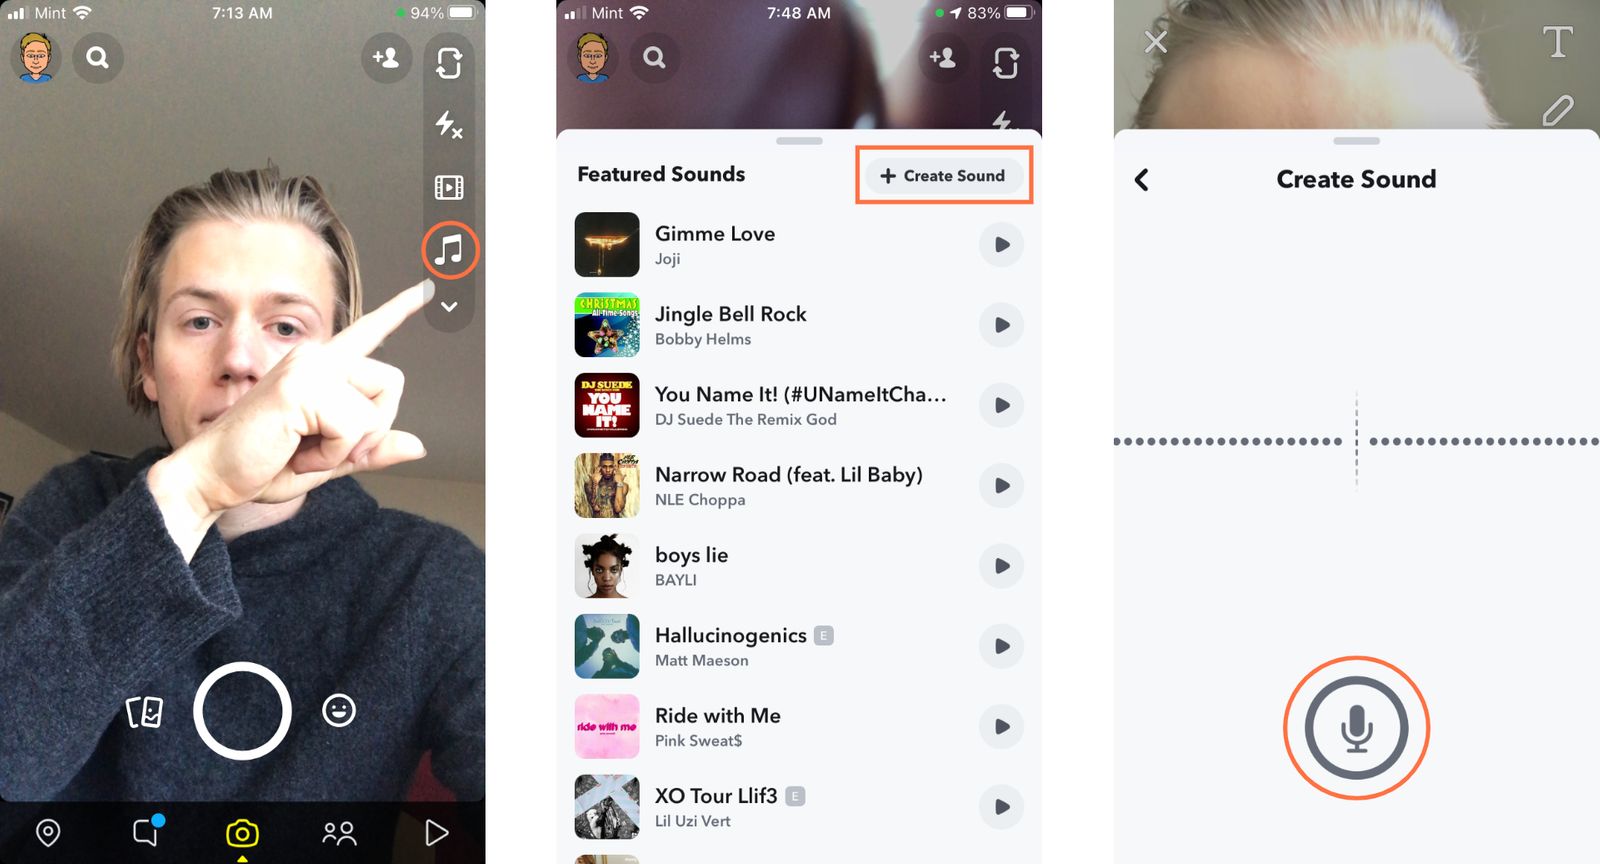 Snapchat Spotlight What You Should Know About Posting, Editing, and